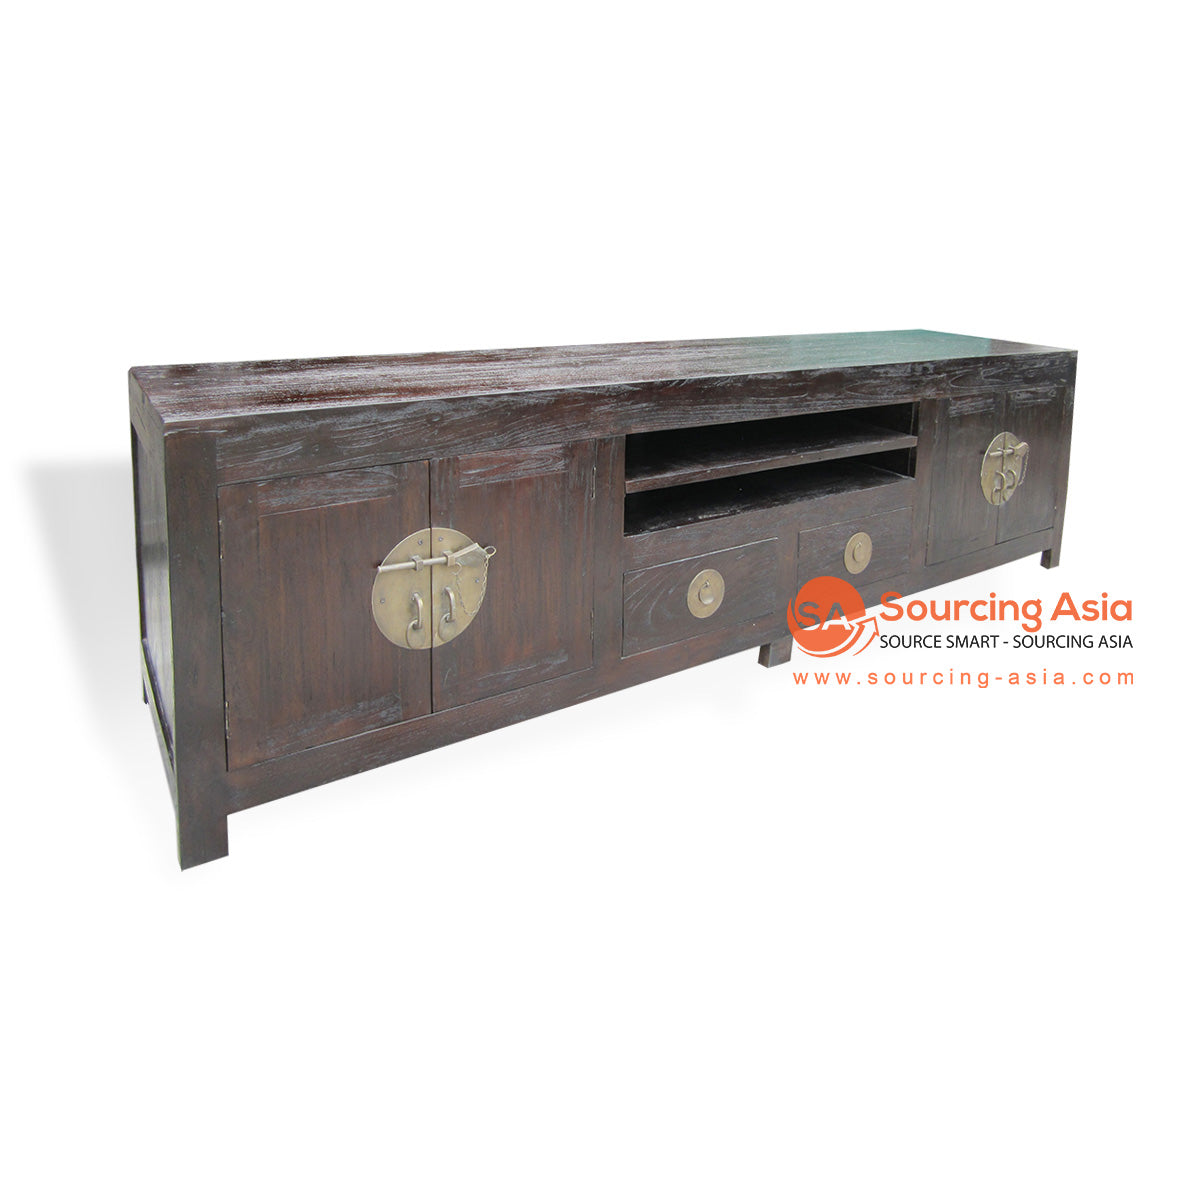 KYT80001-220 DARK BROWN RECYCLED TEAK WOOD FOUR DOORS AND TWO DRAWERS ENTERTAINMENT UNIT